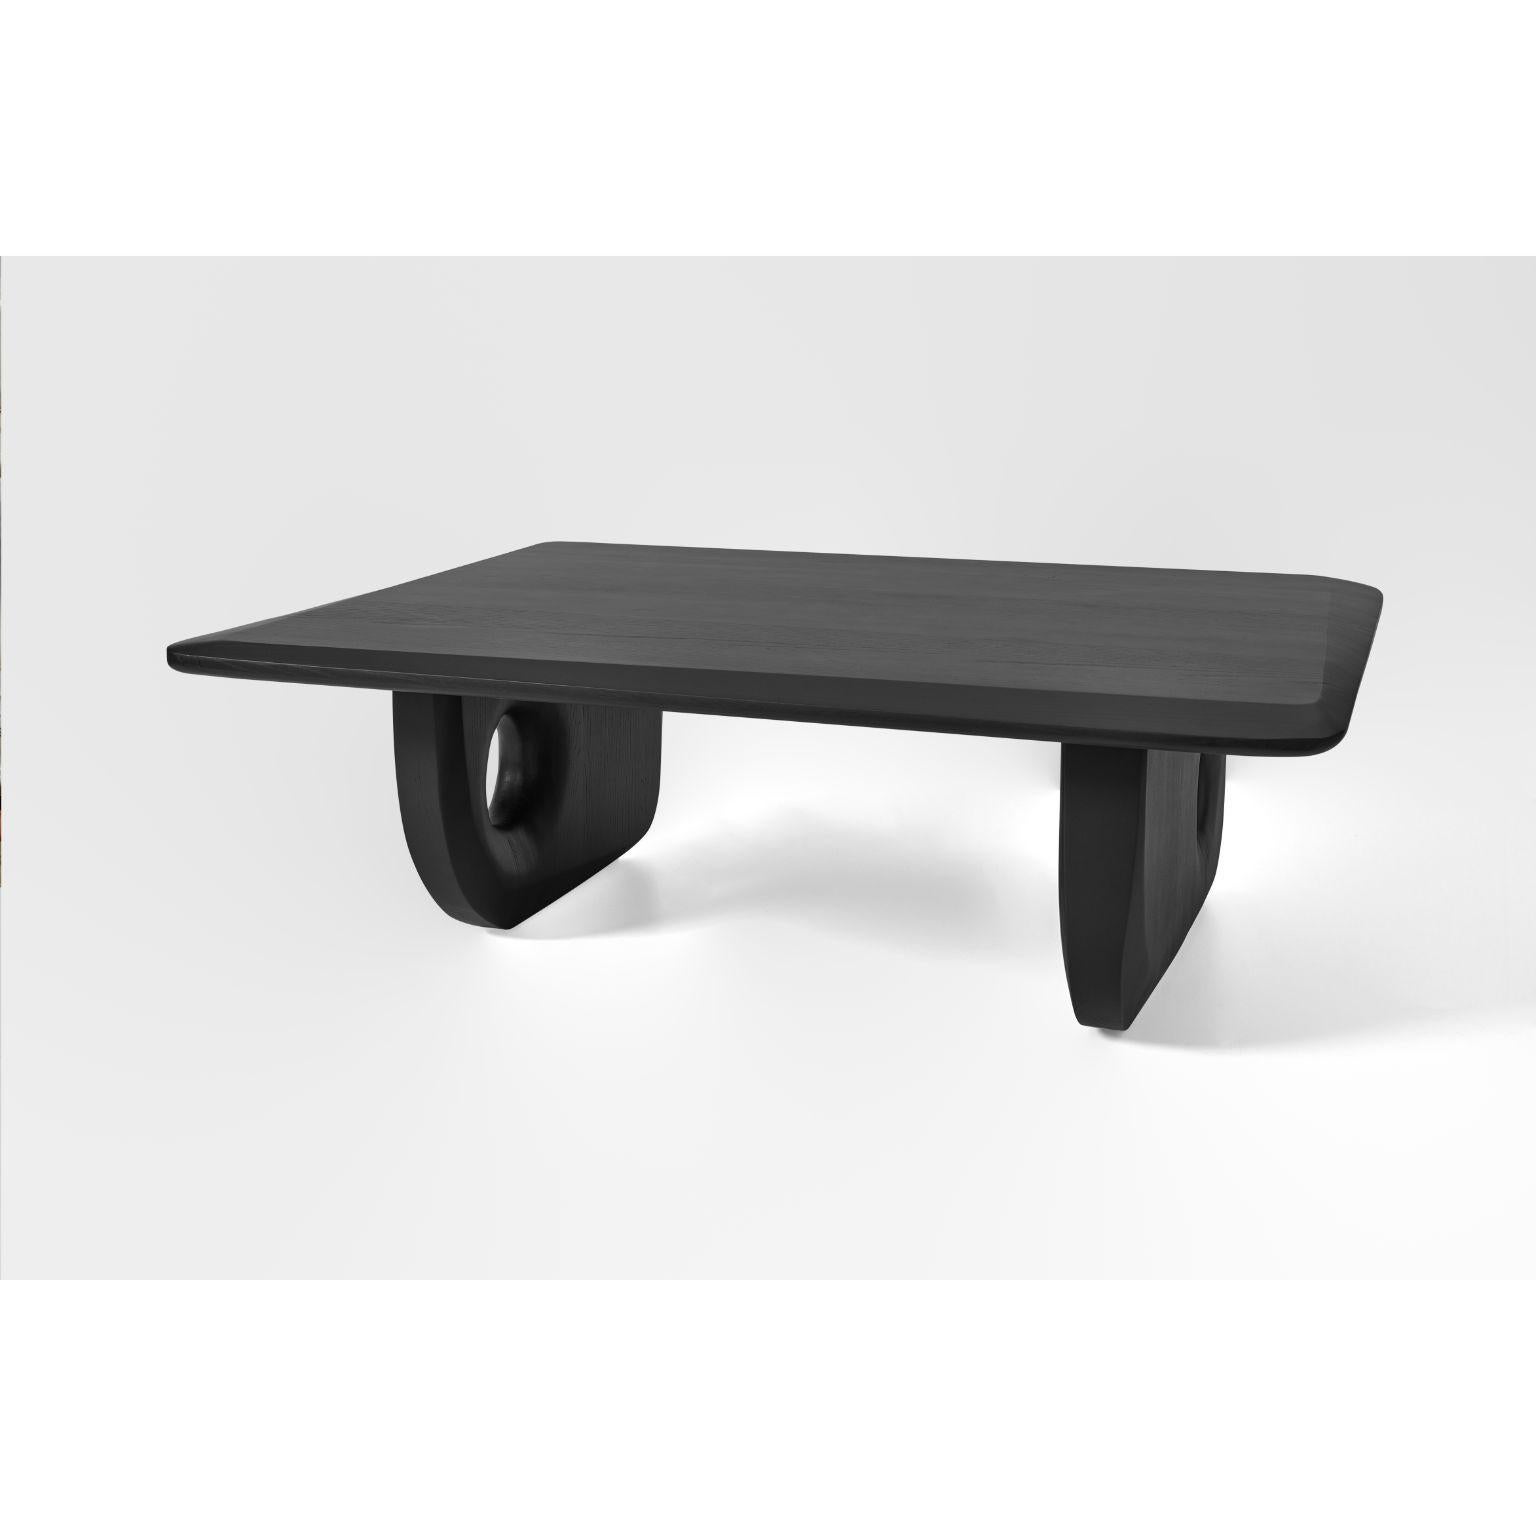 Turkish Zomana Low Table L by Contemporary Ecowood For Sale